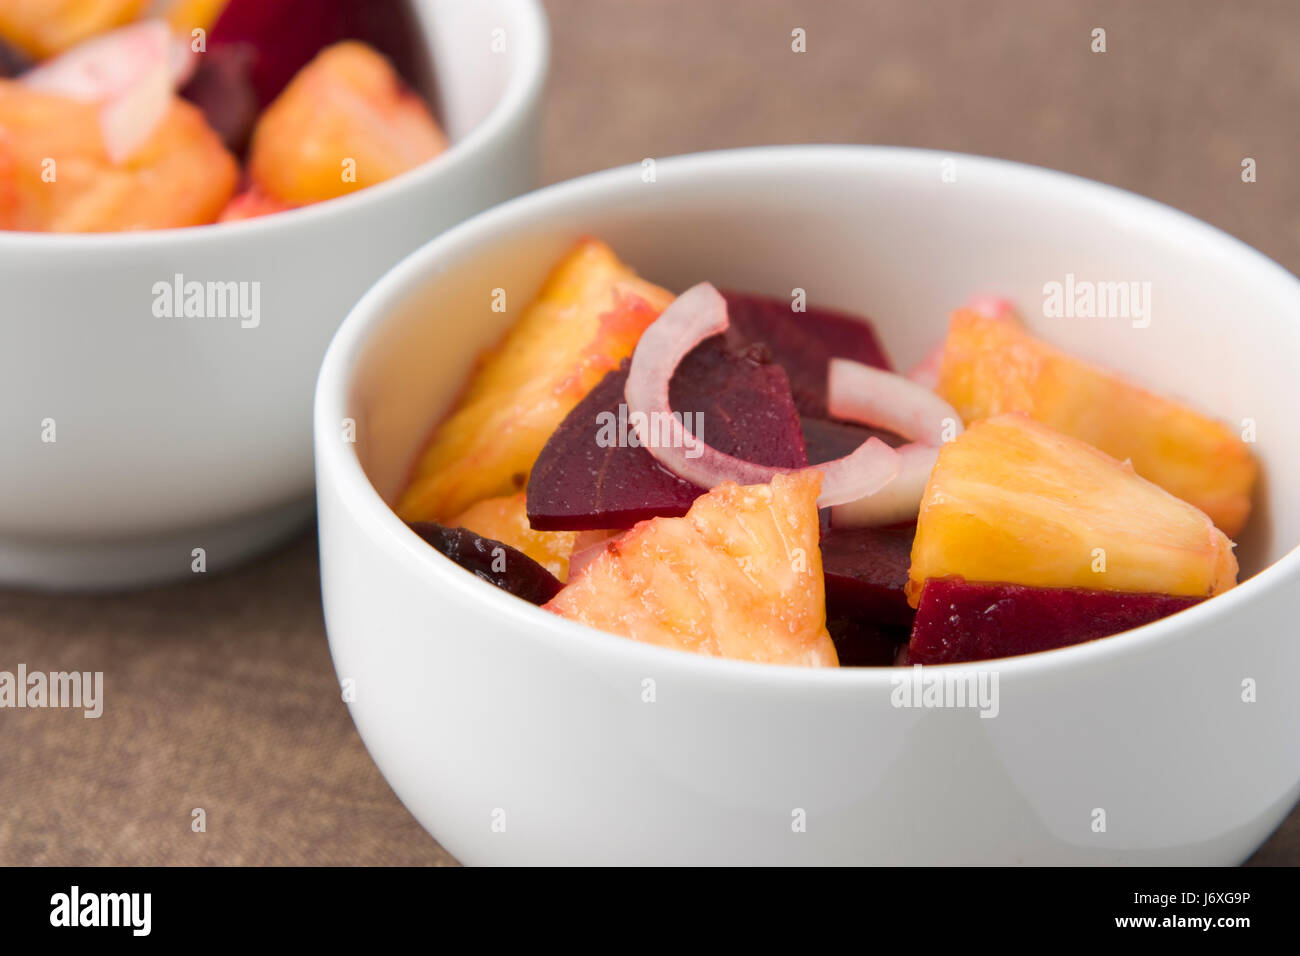 beds vegetable pineapple african vegetarian red salad healthy food aliment Stock Photo